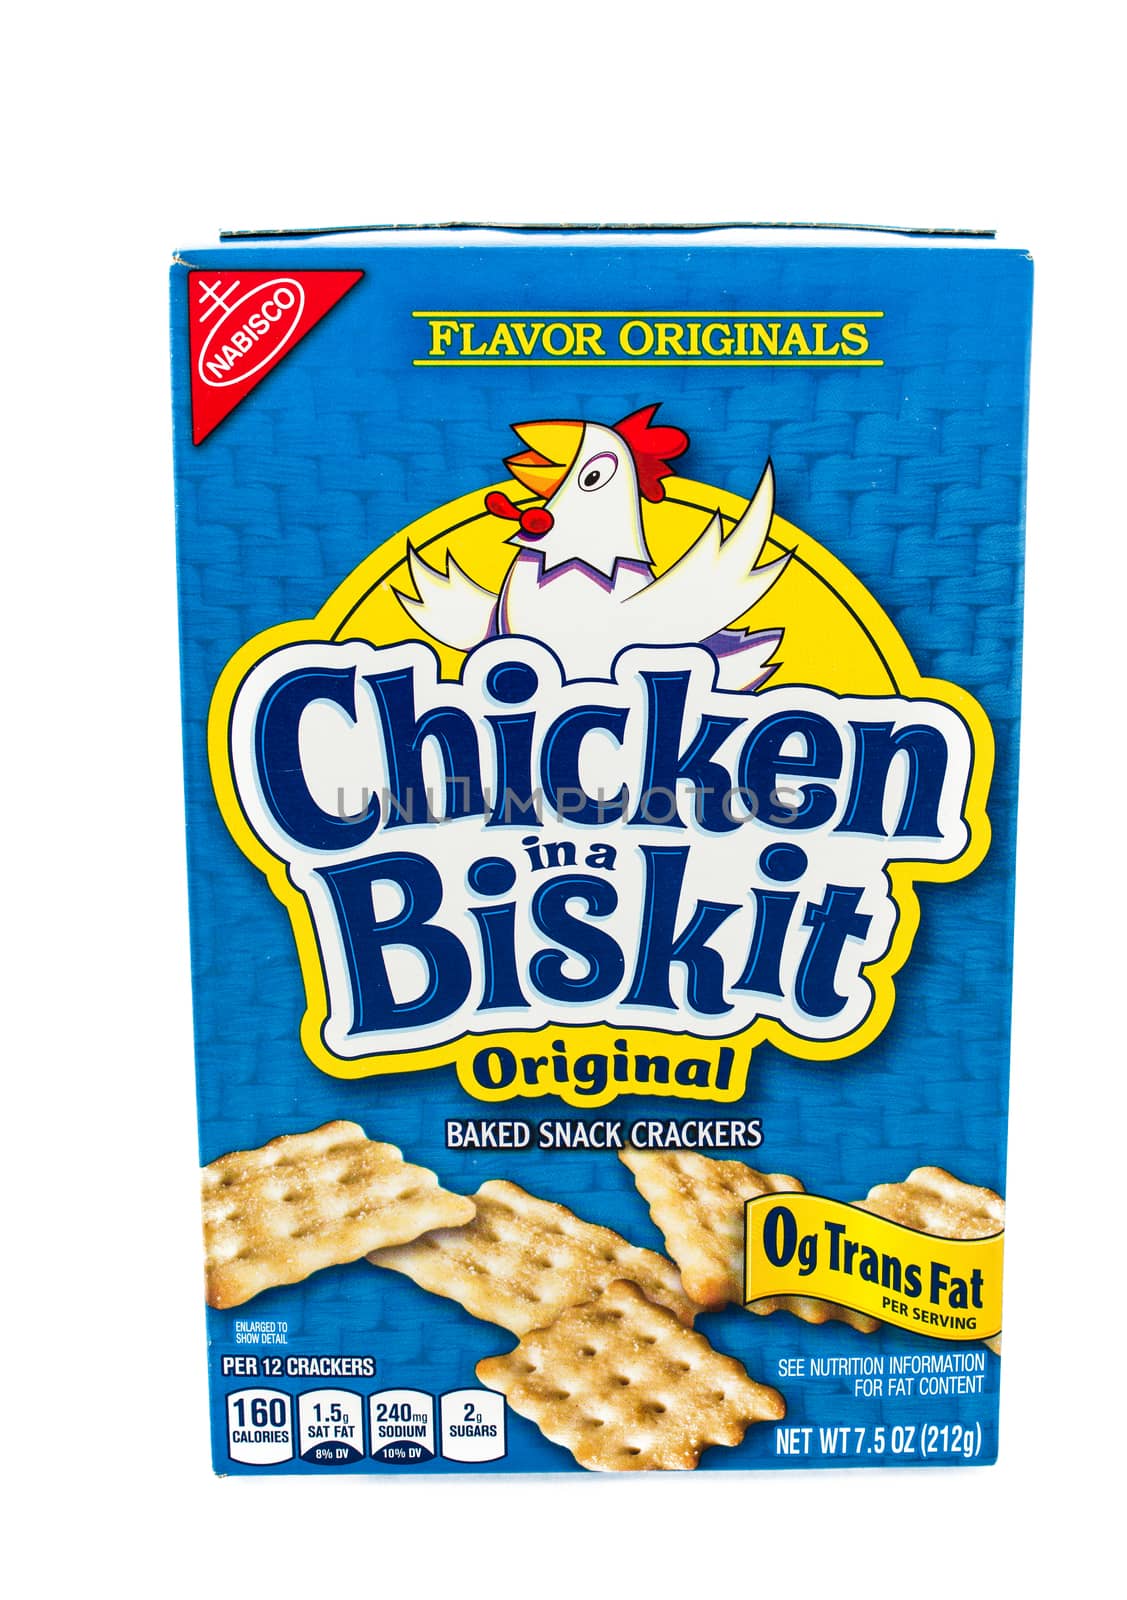 Winneconne, WI - 5 February 2015: Chicken in a Biskit box of flavored crackers made by Nabisco since 1964.